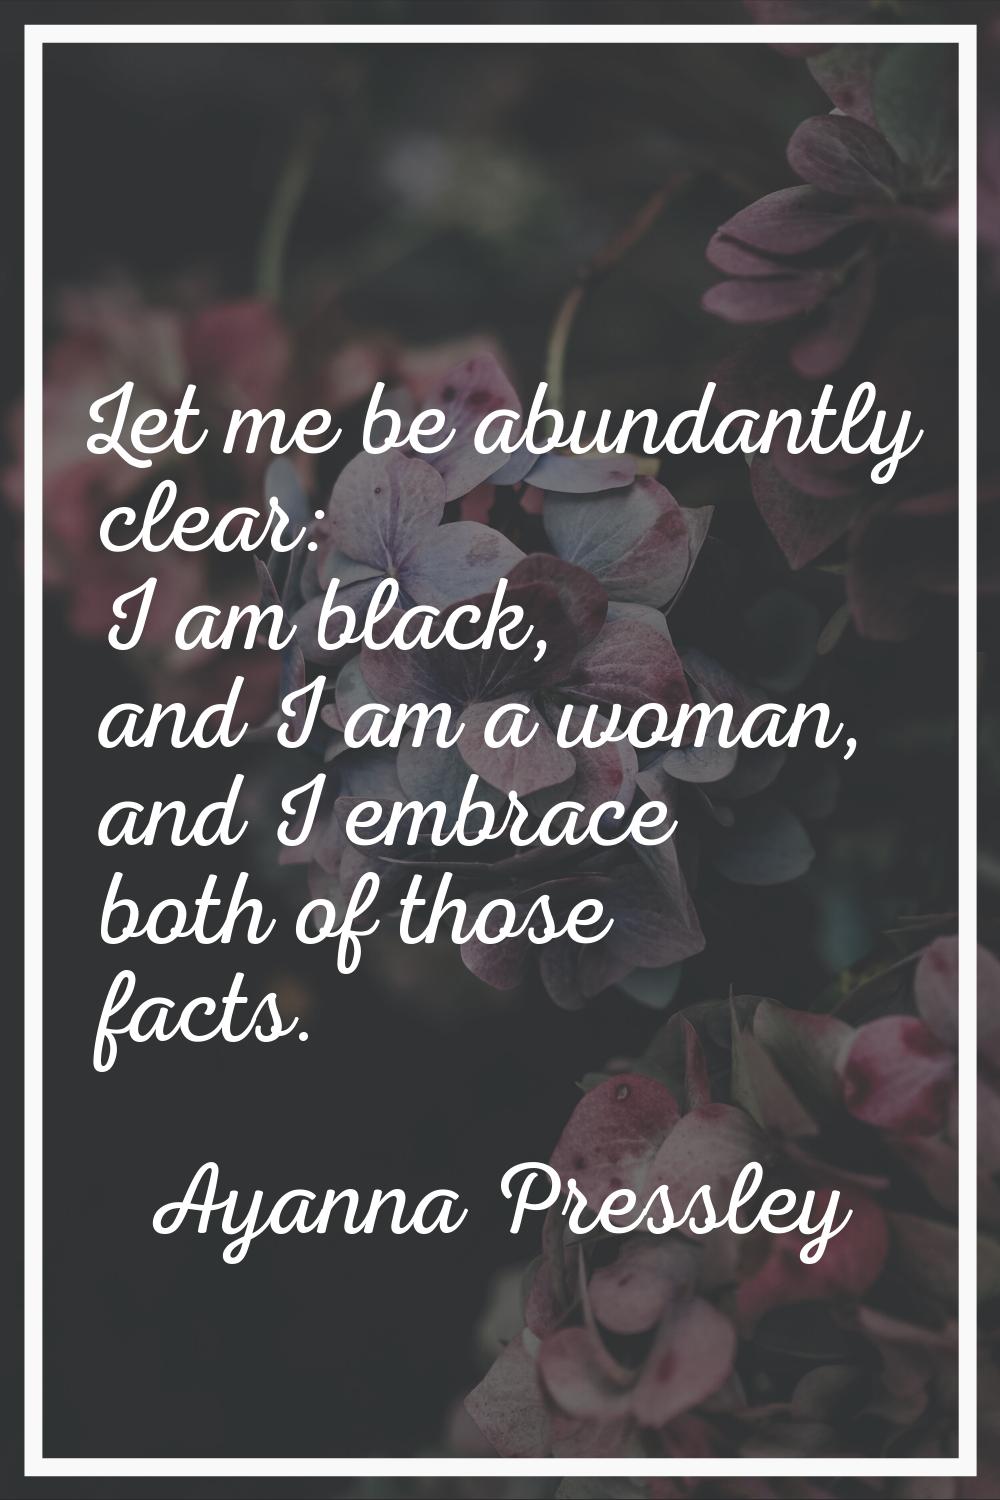 Let me be abundantly clear: I am black, and I am a woman, and I embrace both of those facts.